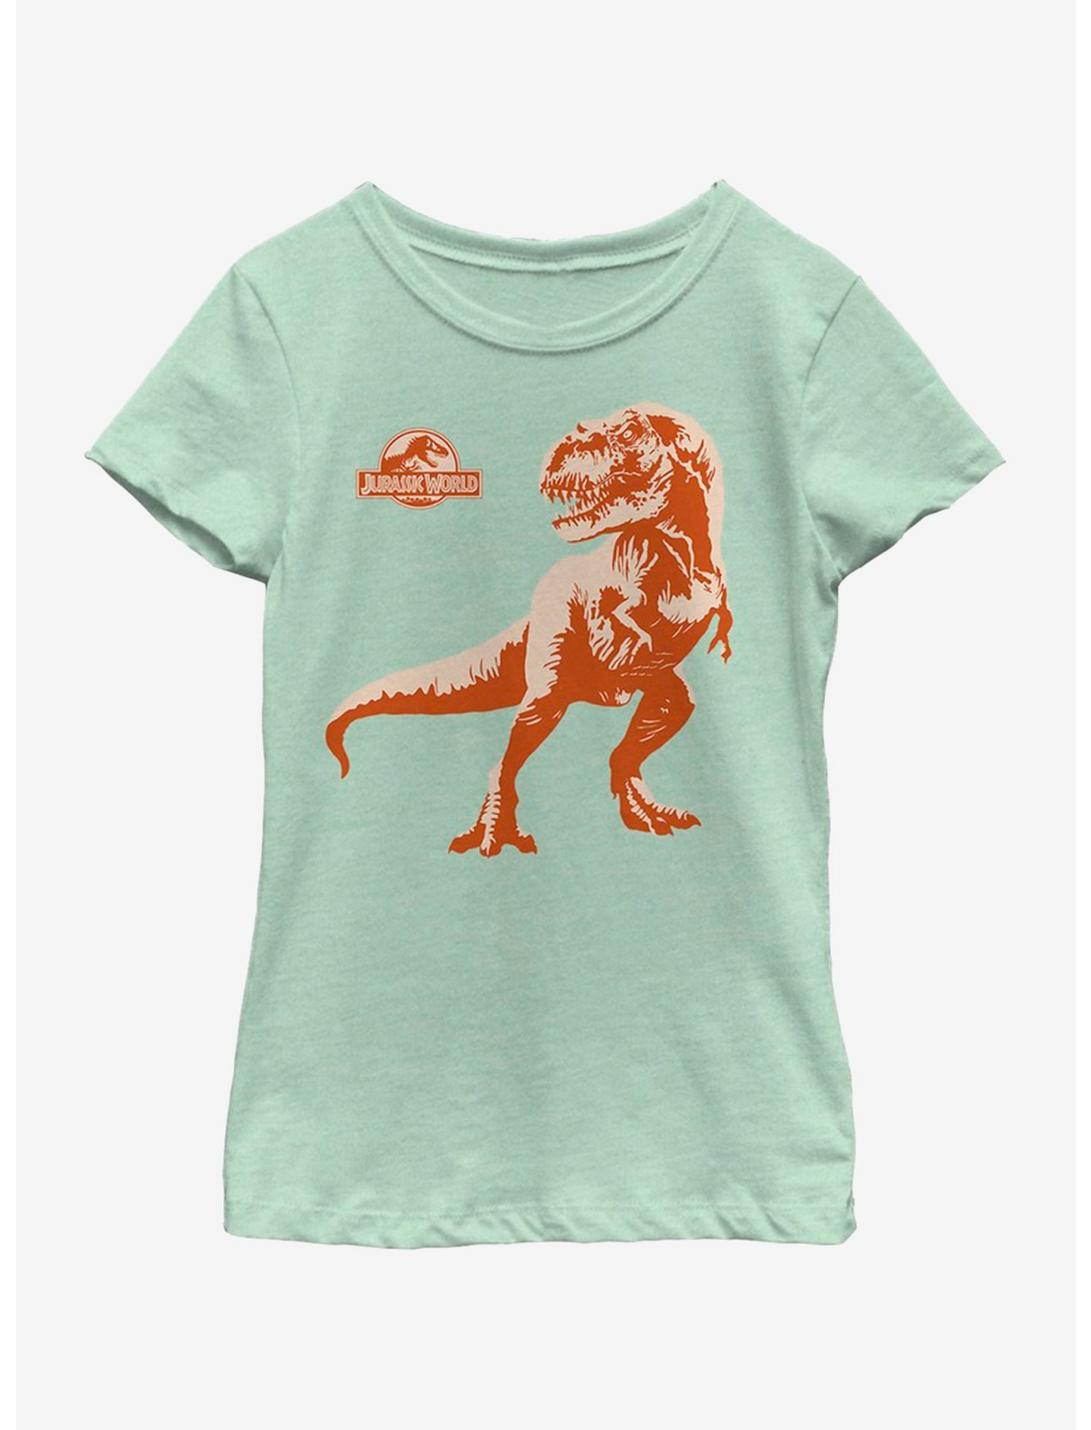 Jurassic Park Action Dino Youth Girls T-Shirt, MINT, hi-res